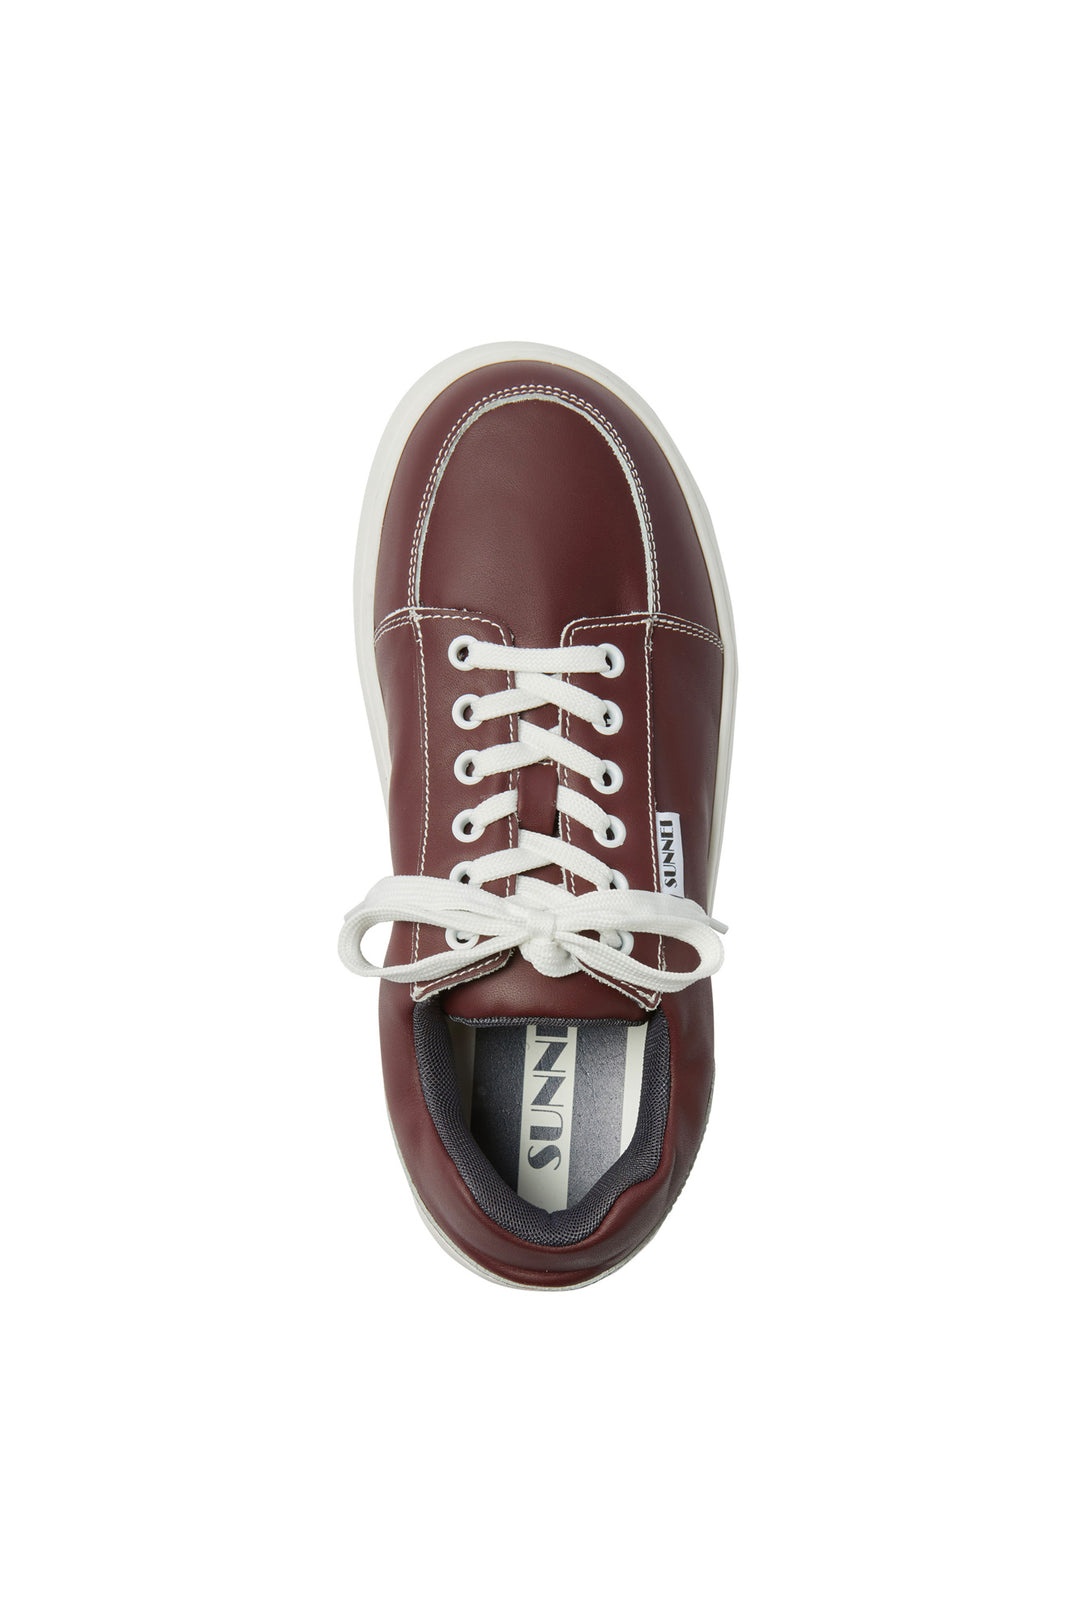 DREAMY SHOES / leather / maroon - 3